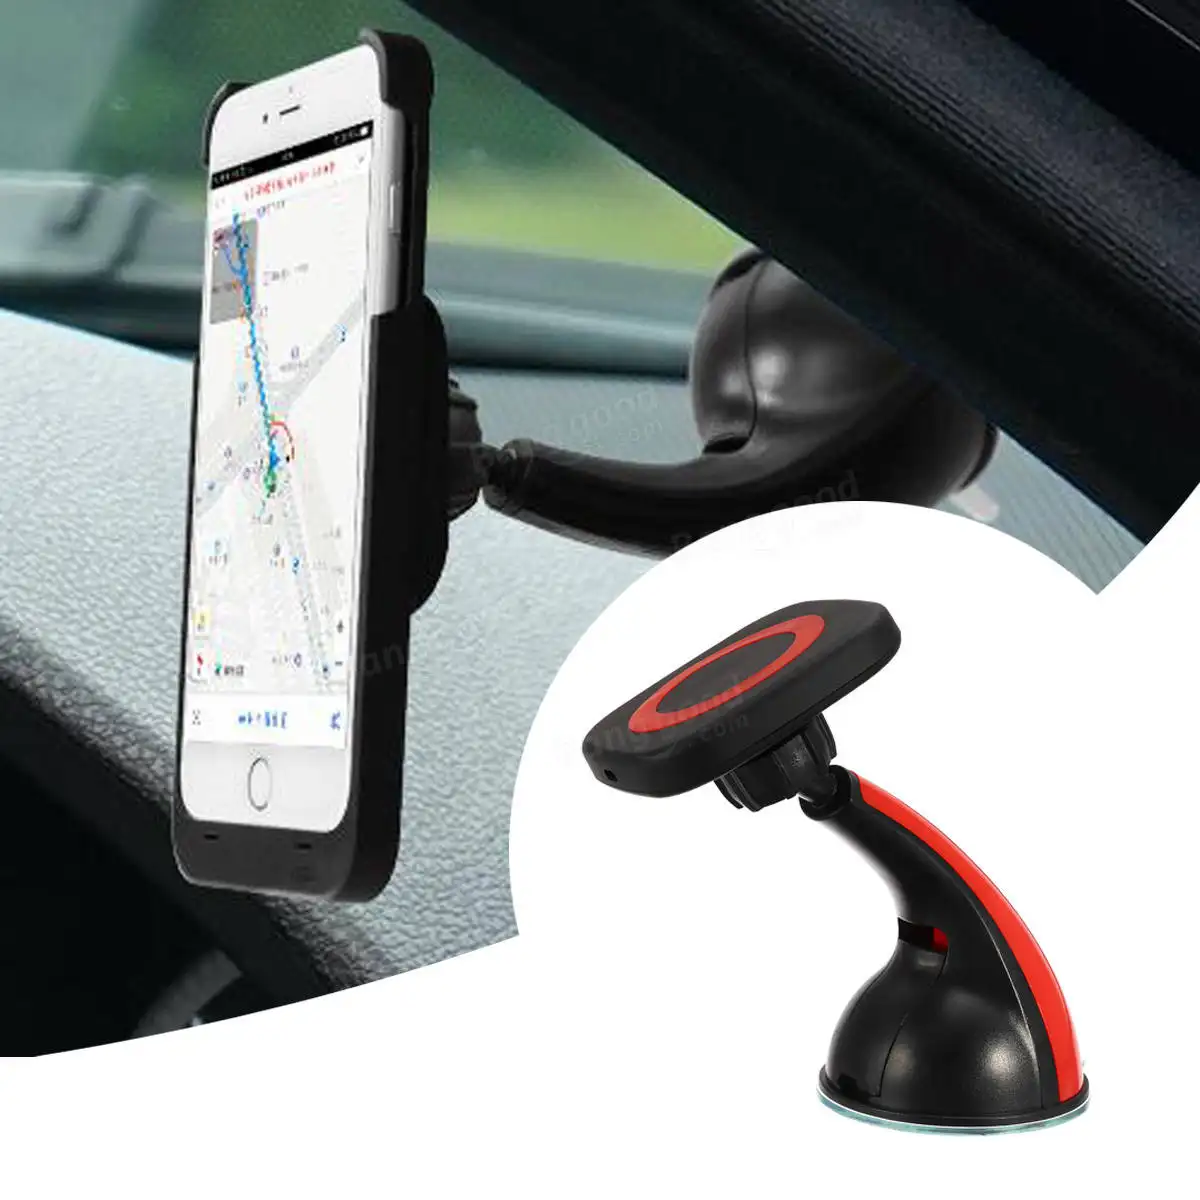 Magnetic Qi Wireless Car Charger Mount Mobile Phone Air Vent Magnet Car Cradle Charging Holder for Samsung Galaxy Note 8 S8 Plus